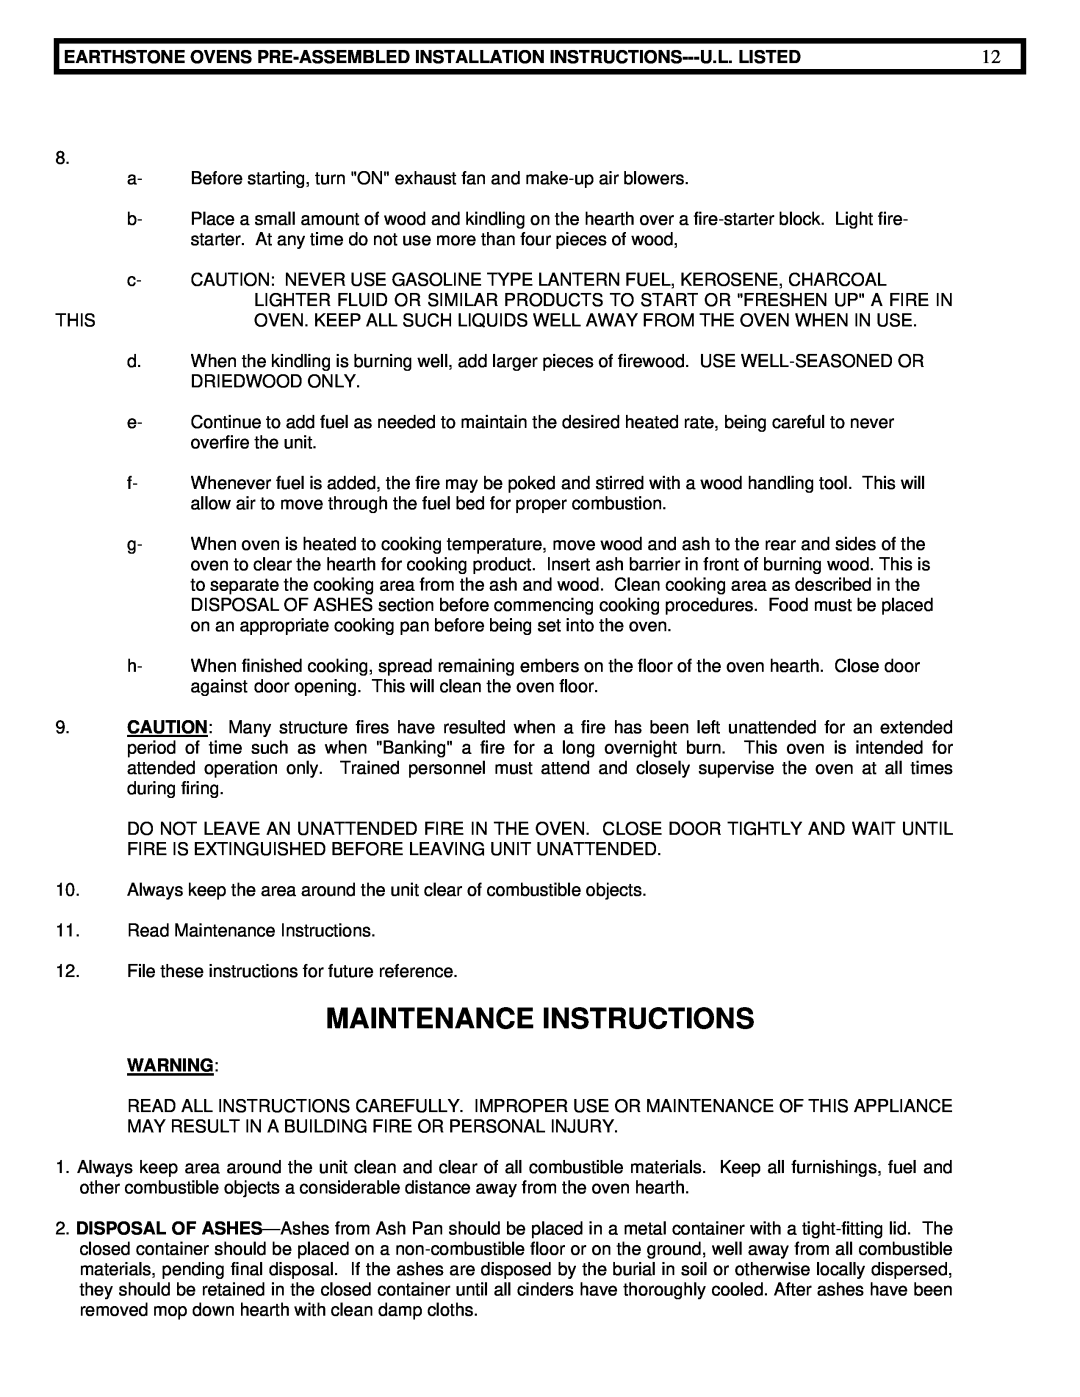 EarthStone woofire oven installation instructions Maintenance Instructions 